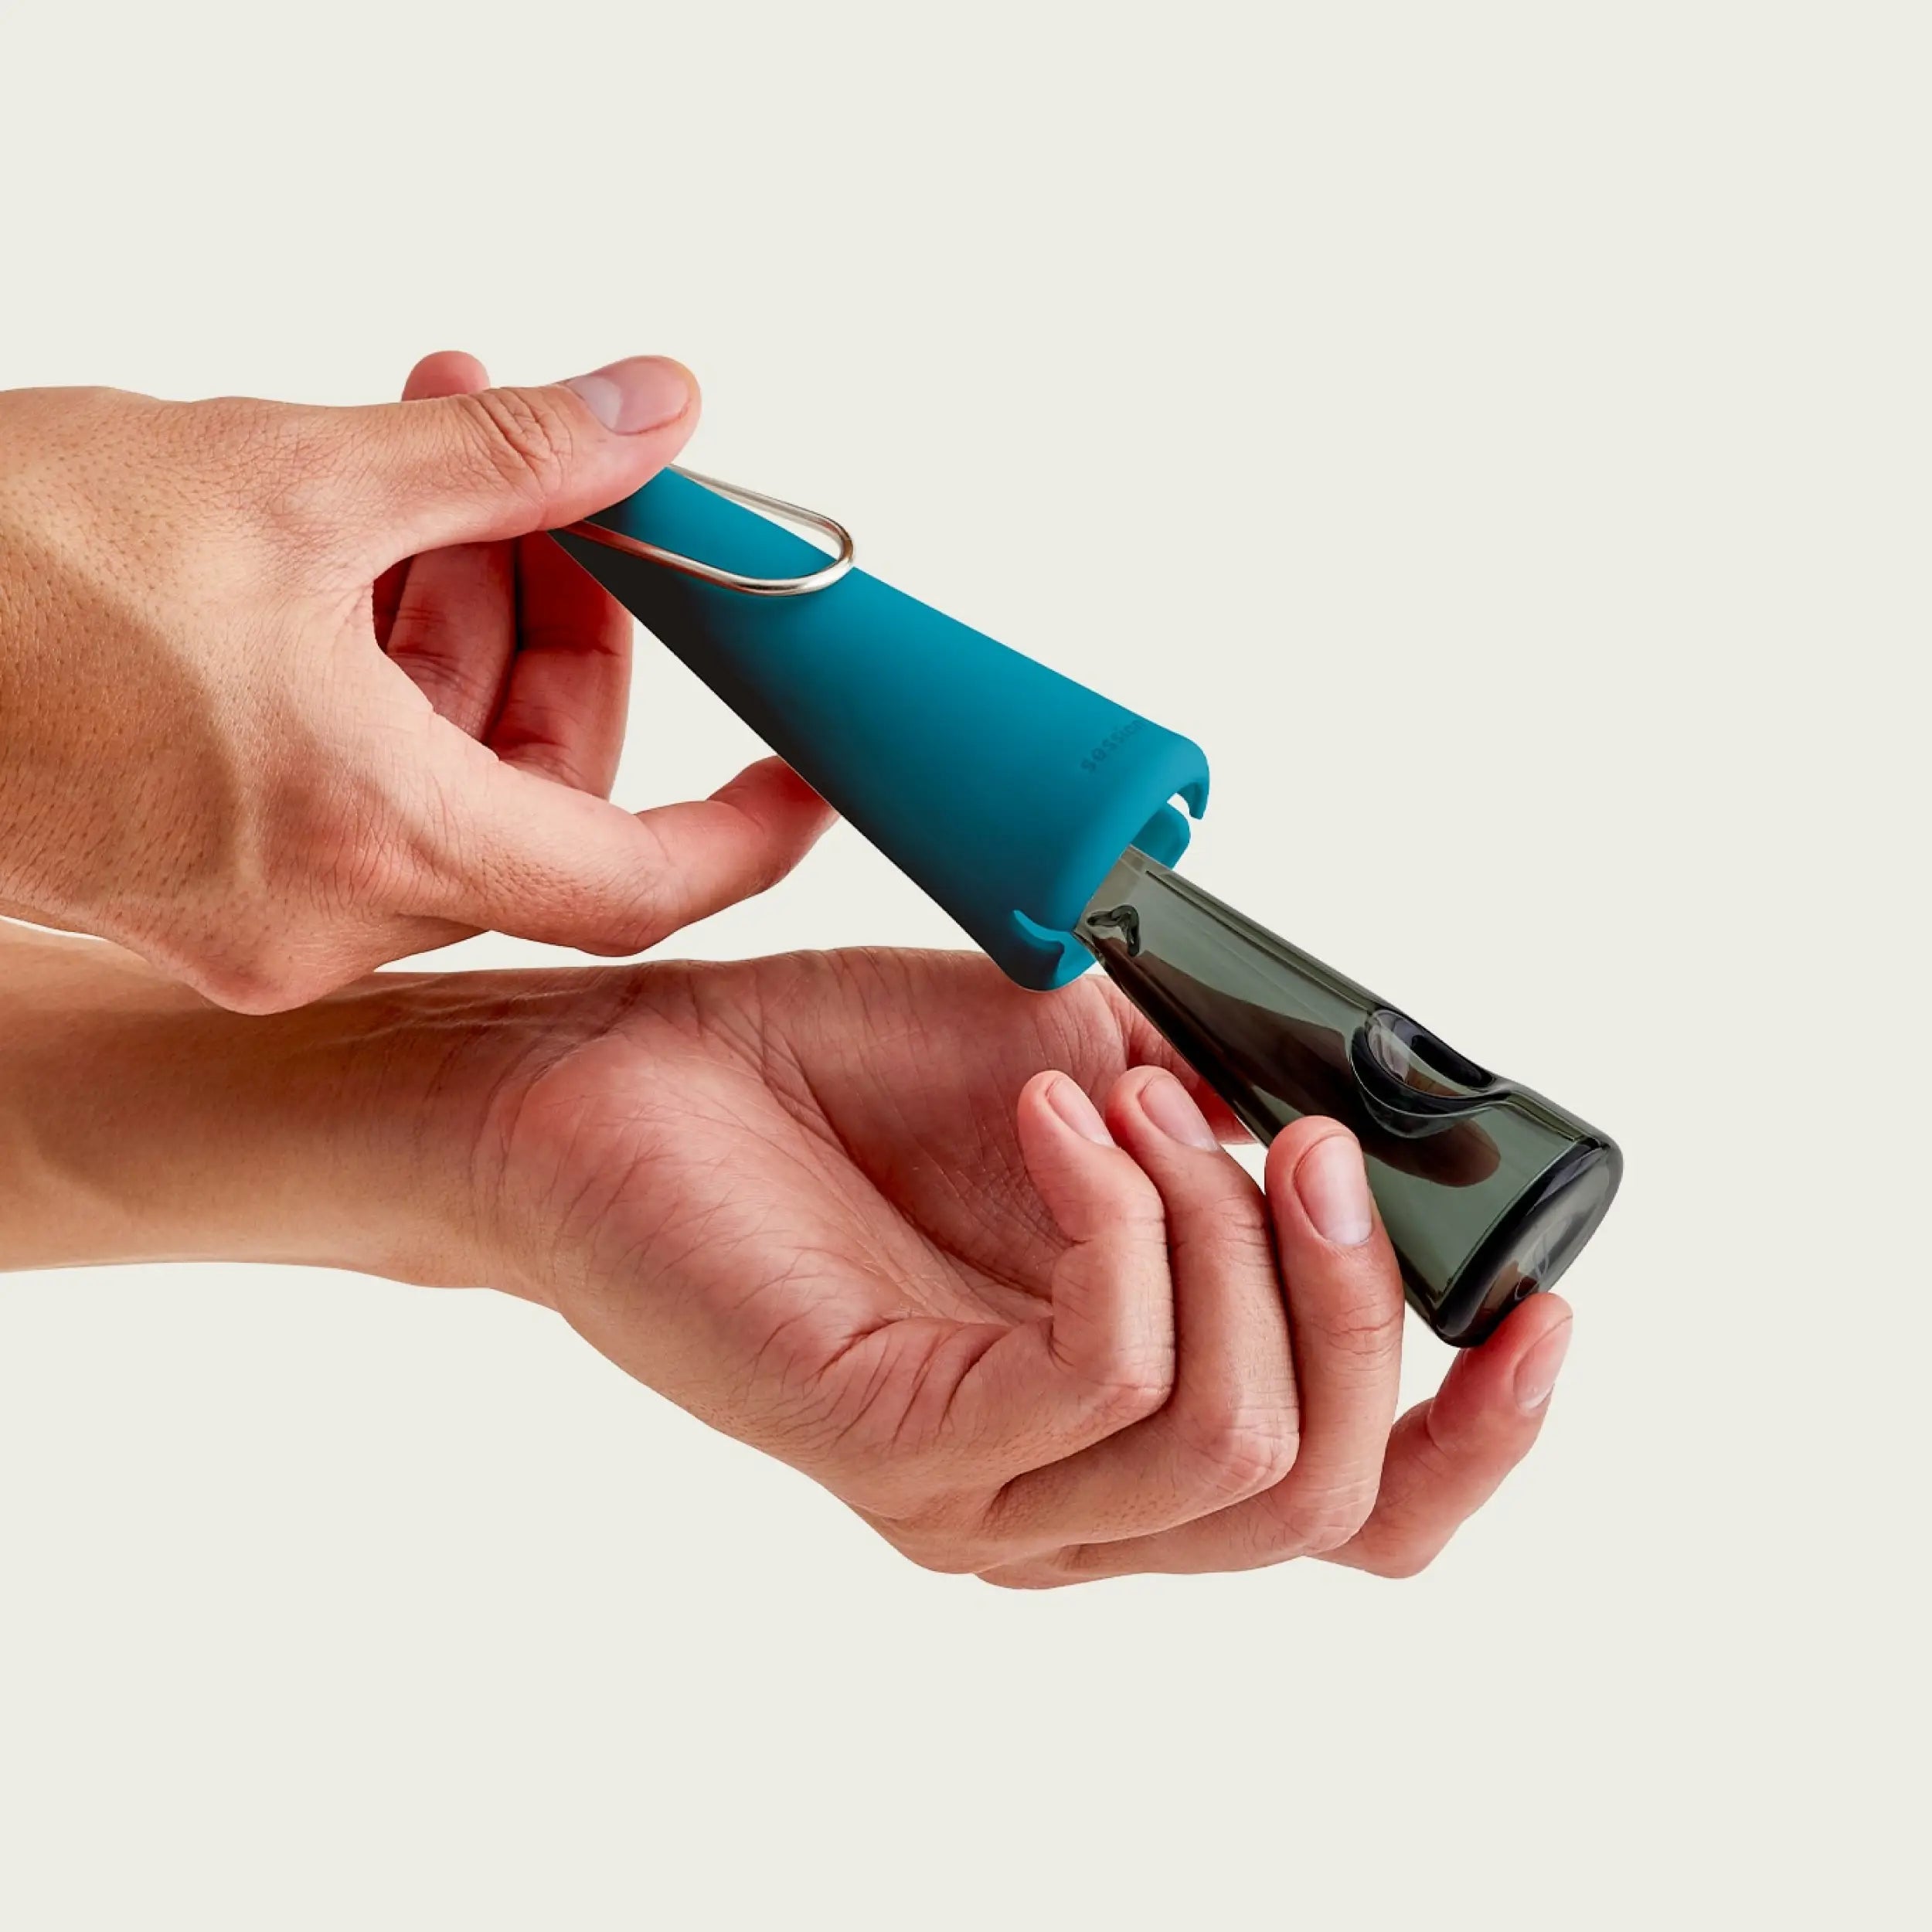 Session's Dream Blue Portable Pipe: Stylish Convenience at Your Fingertips